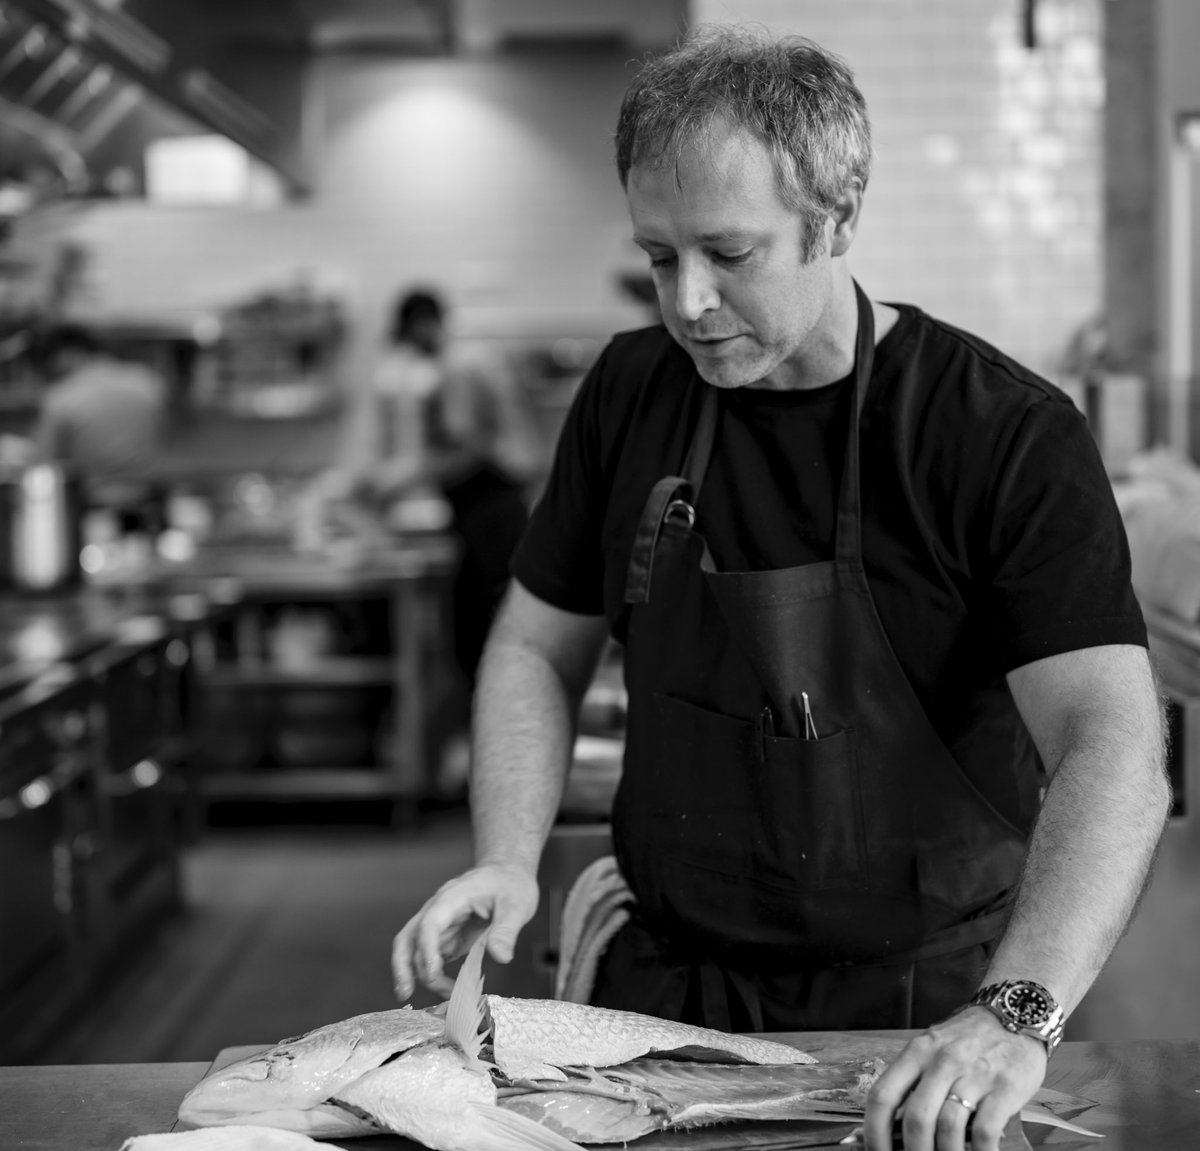 Gordon Ramsay called chef William Dissen one of “best chefs in the country” and one of “the most sustainable chefs on the planet.” We are honored to welcome Chef Dissen as our newest NC Catch Chef Ambassador. https://t.co/WHfhssmu3S https://t.co/gM3Mz9WxBX